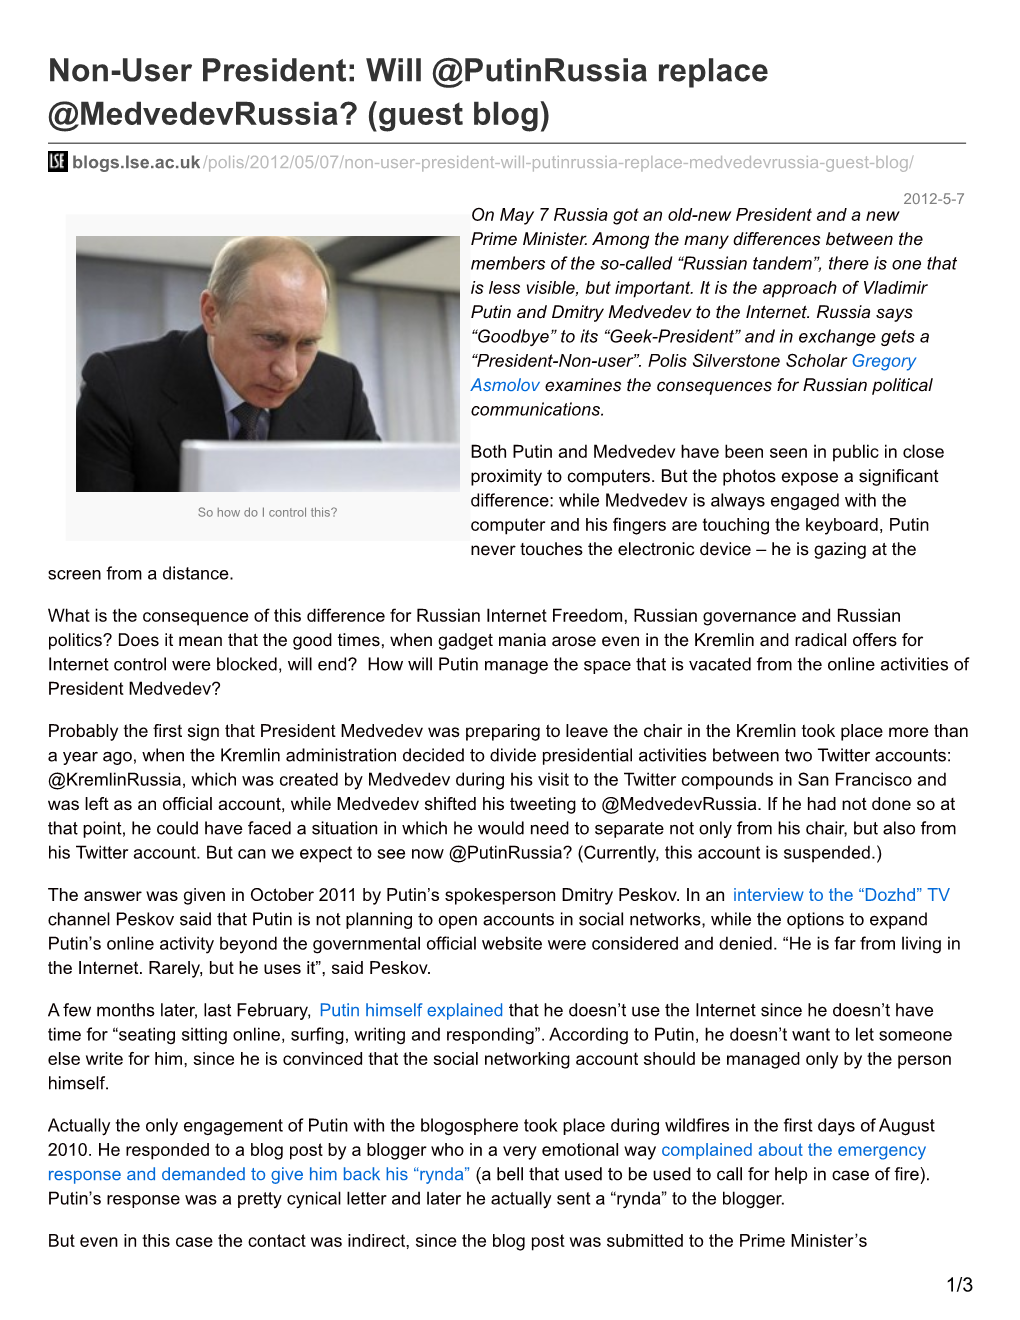 Non-User President: Will @Putinrussia Replace @Medvedevrussia? (Guest Blog)